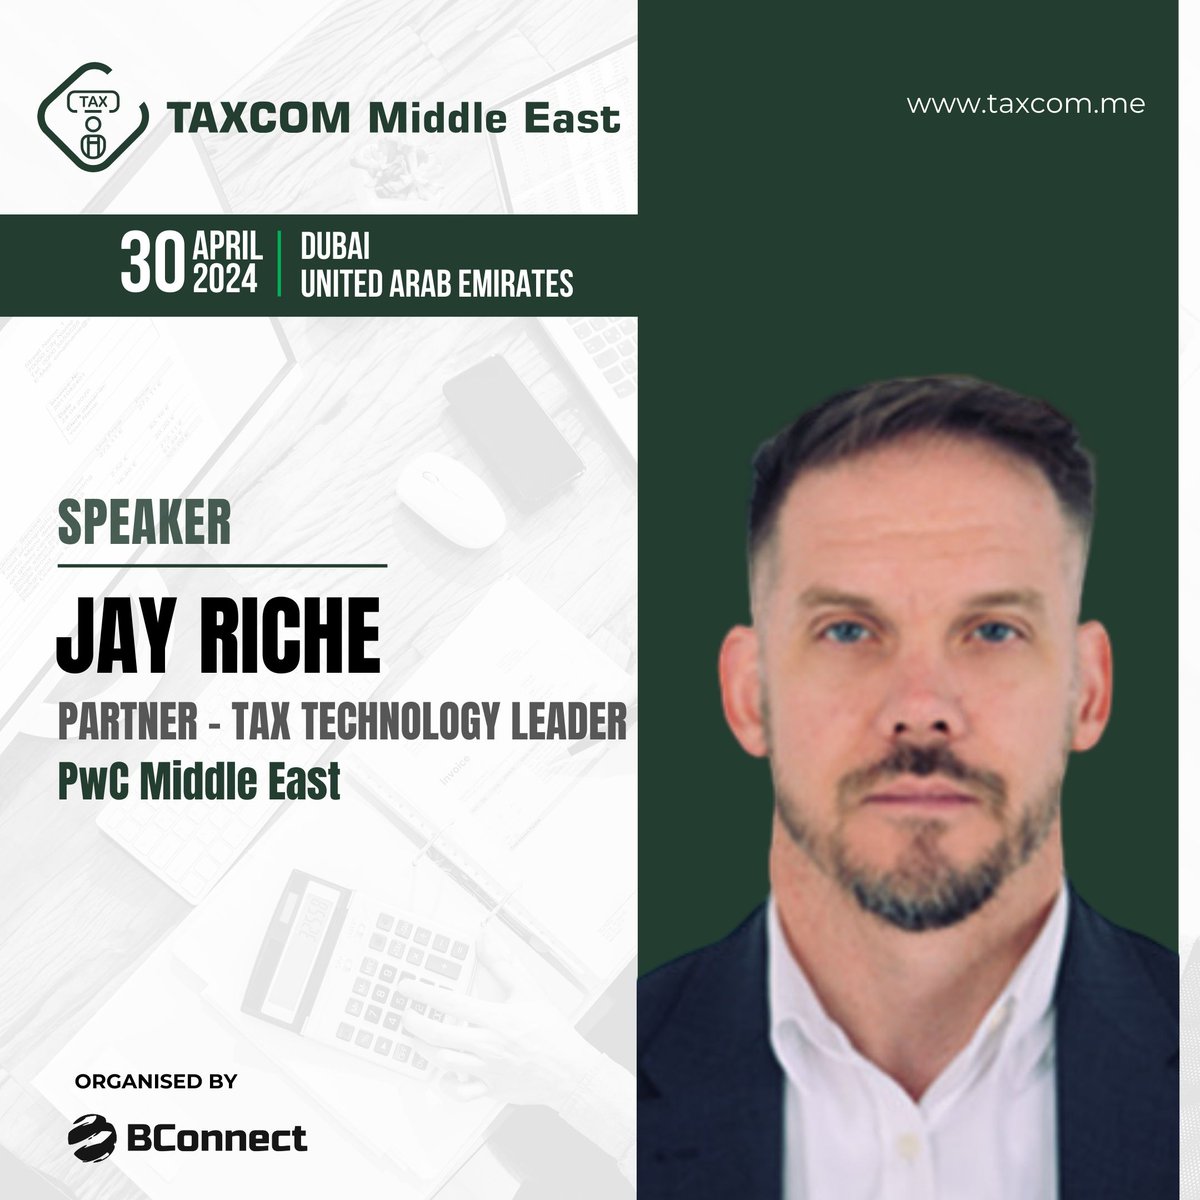 #SpeakerAnnouncement
We are delighted to announce Jay Riche, Partner - Tax Technology Leader, PwC Middle East as a key speaker for TAXCOM Middle East Summit 2024. 
Visit taxcom.me to register for the summit. 
#TAXCOMSummit #TAXCOMME #MiddleEast #Tax